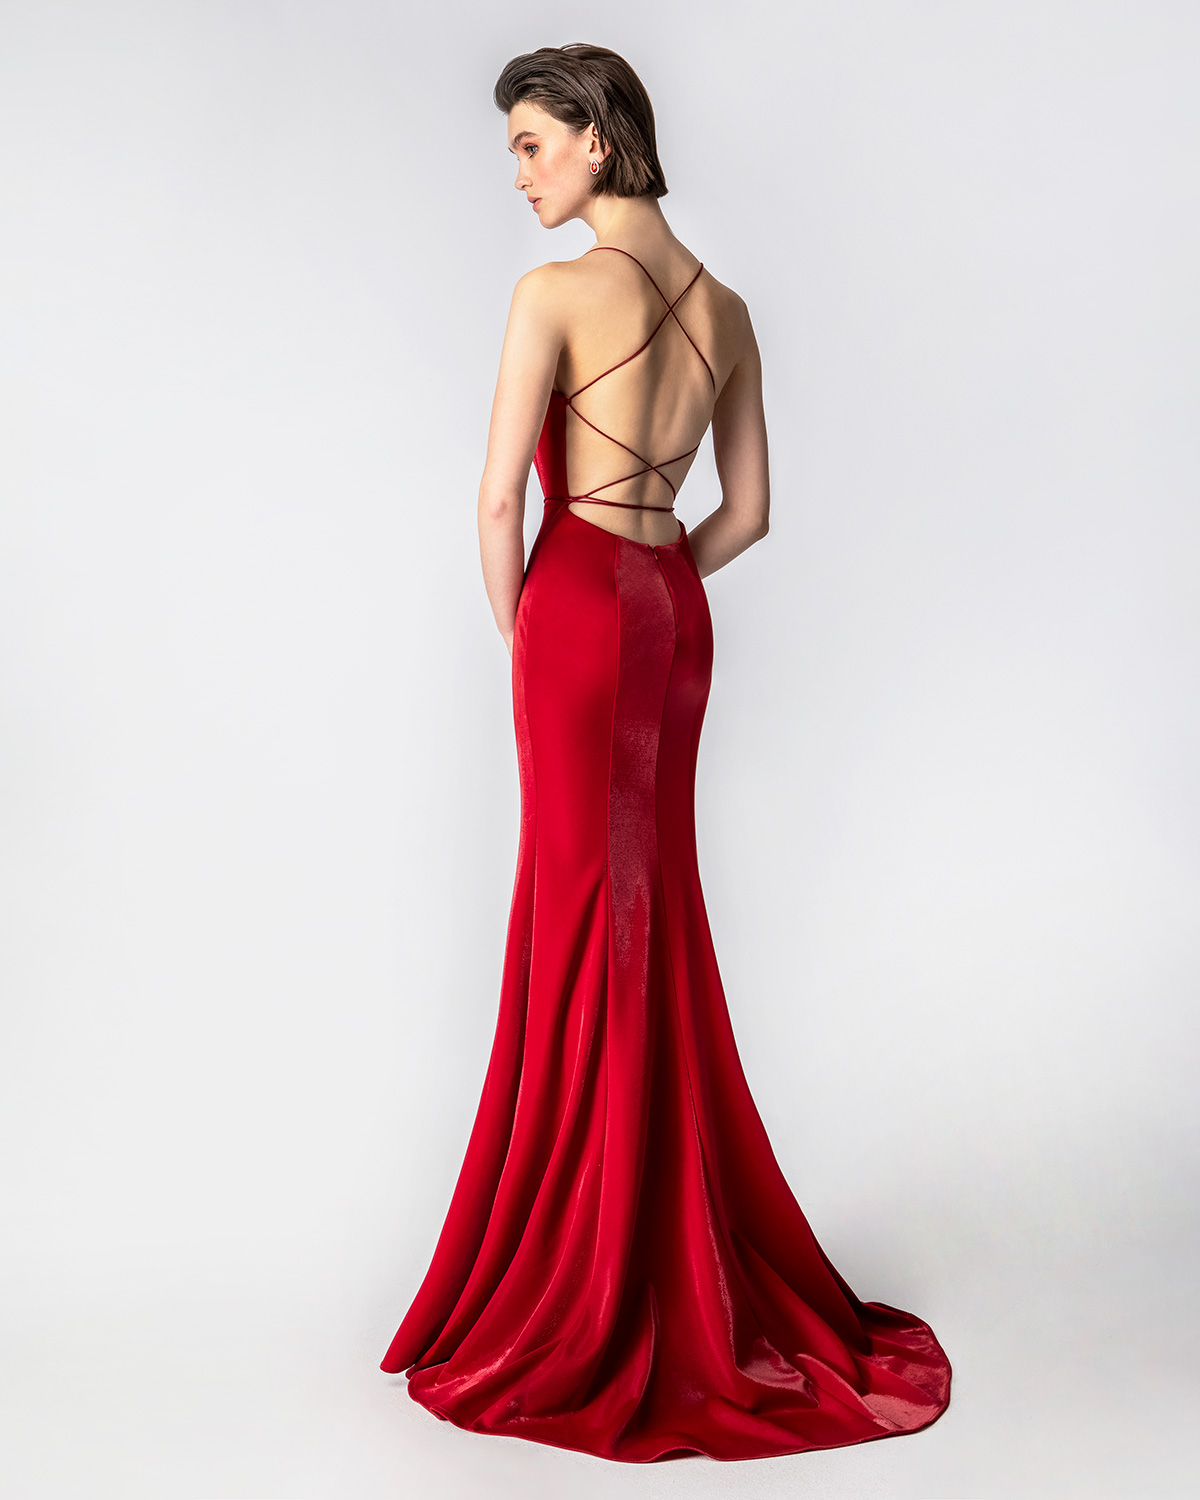 Cocktail Dresses / Long evening dress with shining fabric and open back